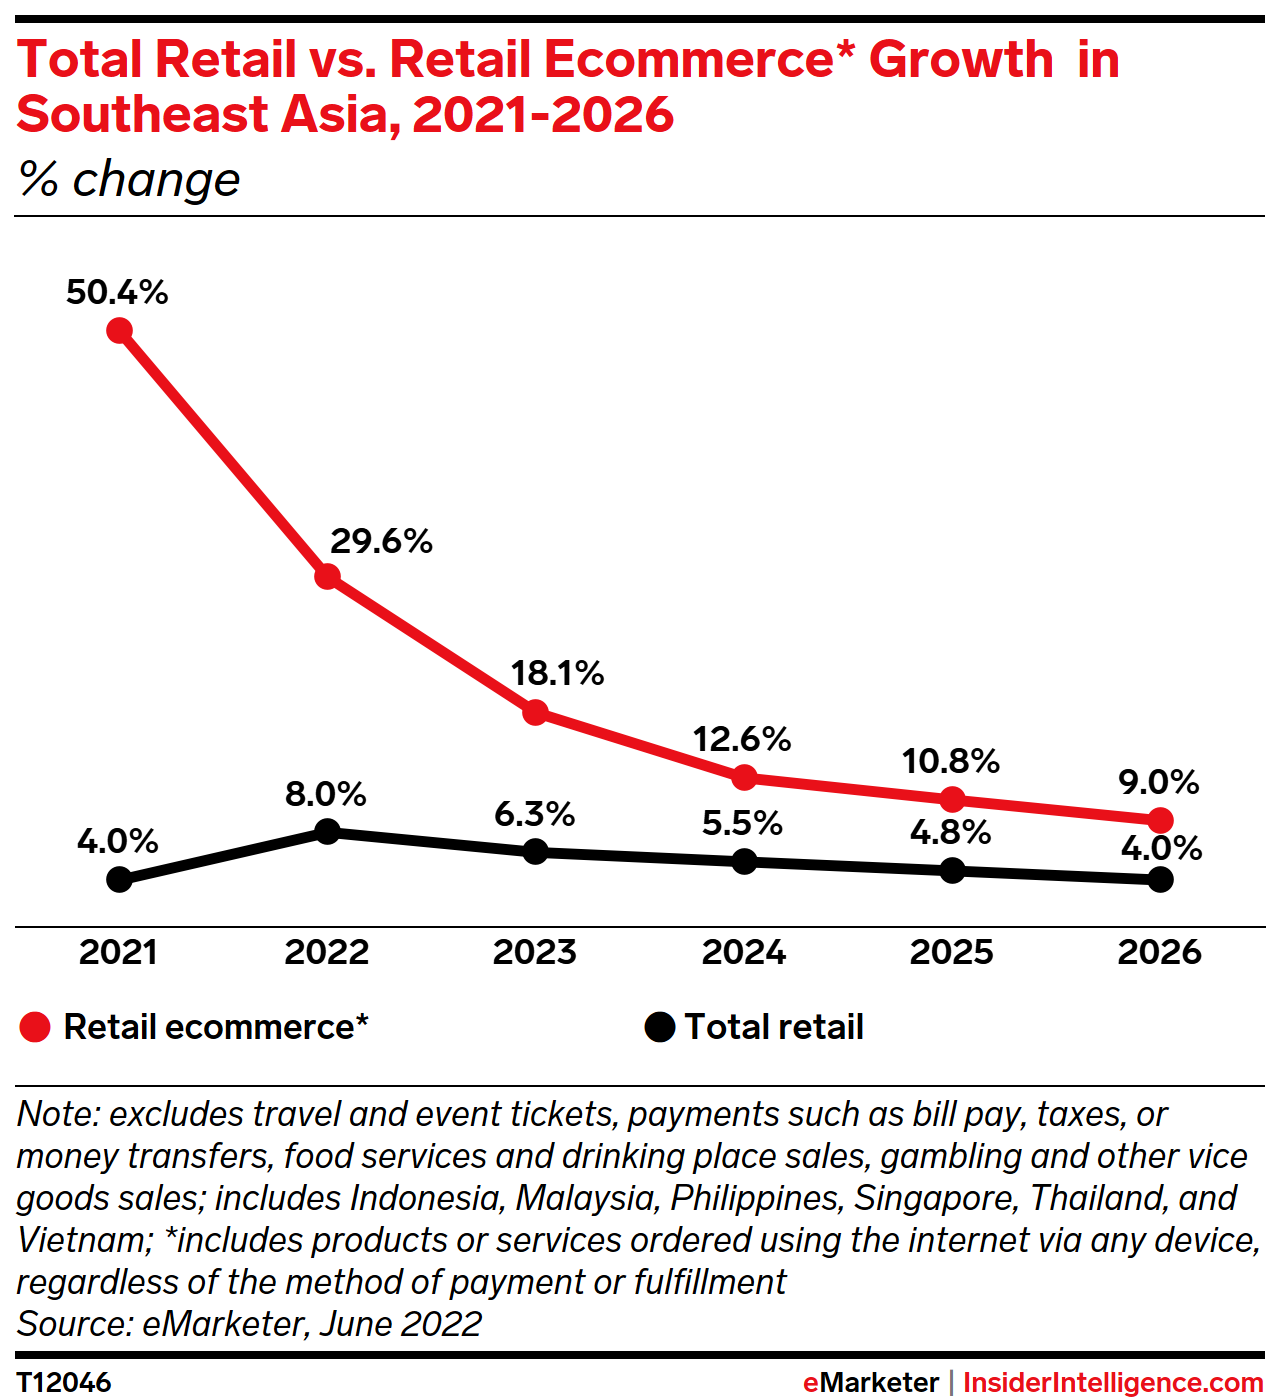 Total Retail vs. Retail Ecommerce* Sales Growth in Southeast Asia, 2021-2026 (% change)